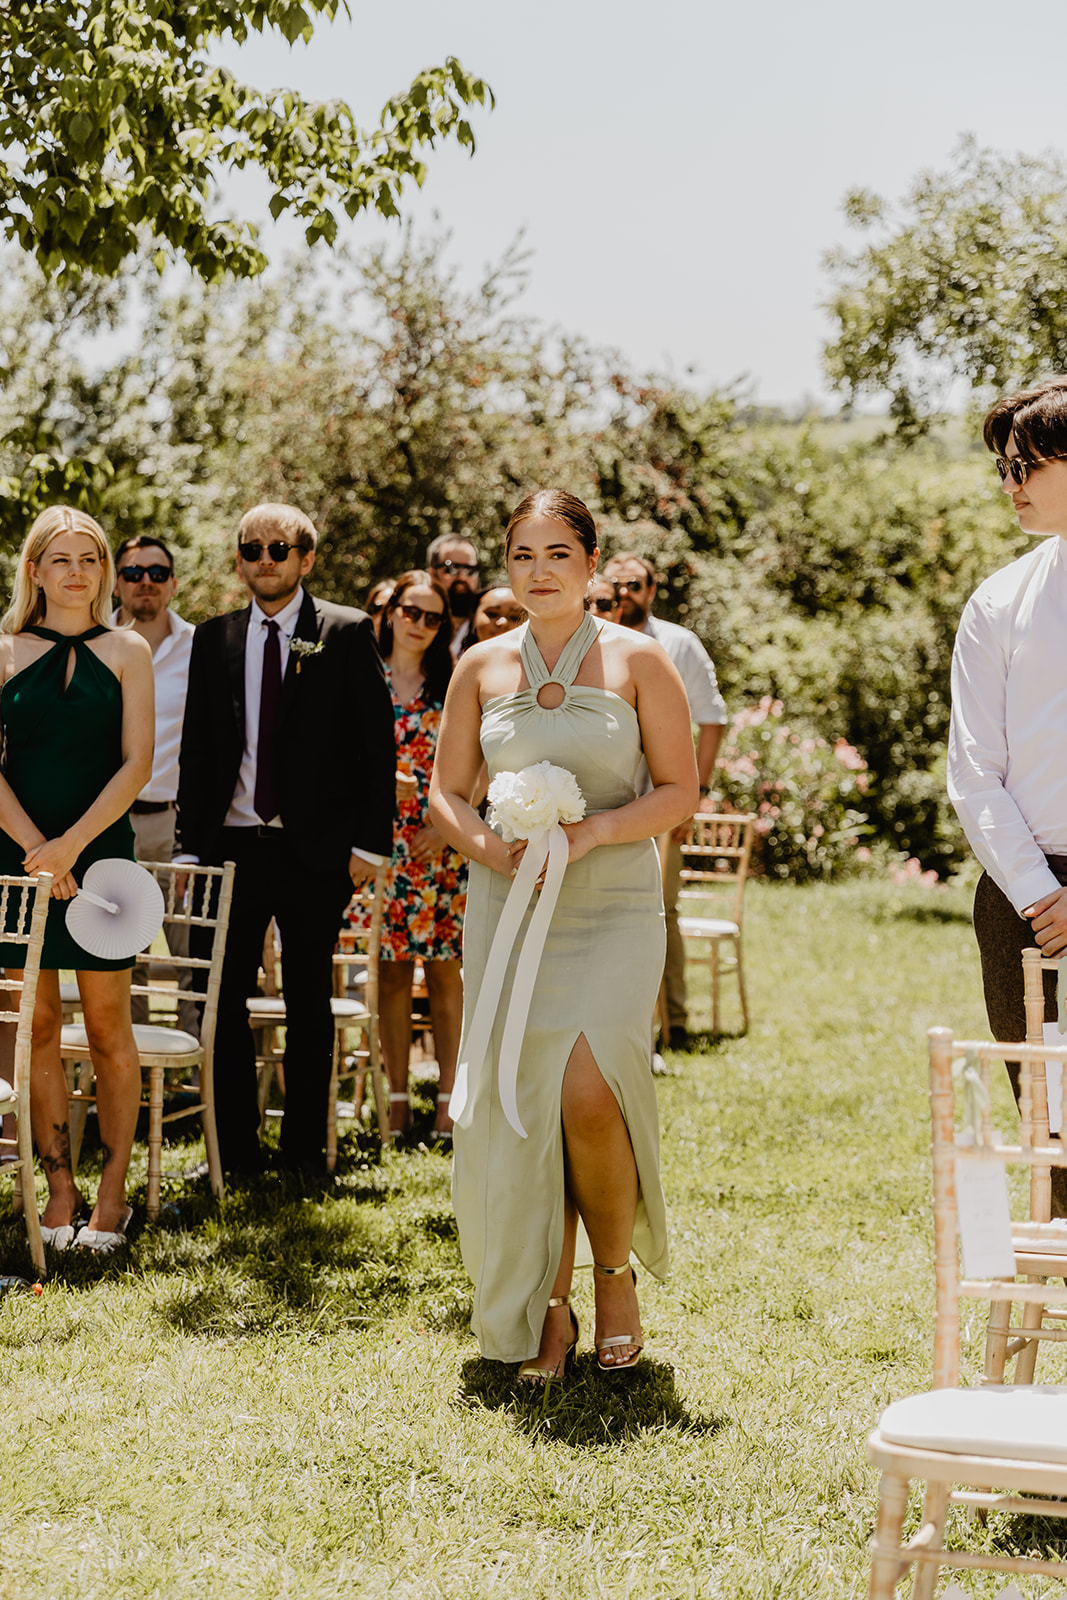 Bridesmaid walking down the aisle at a France Destination Wedding. Photography and Videography by Olive Joy Photography